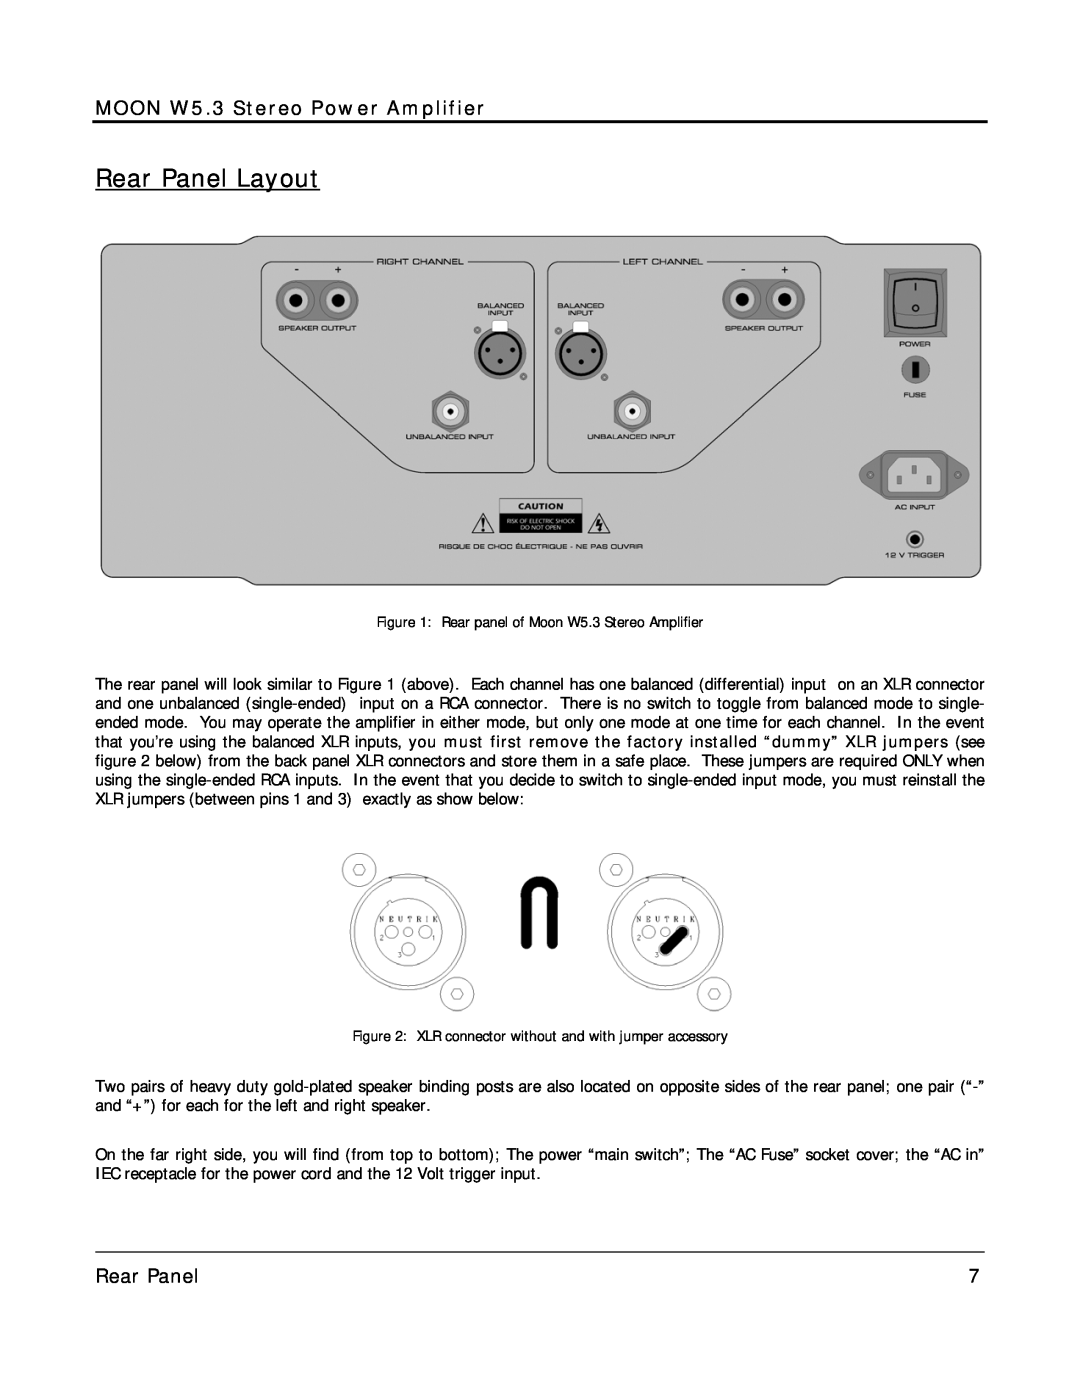 Simaudio owner manual Rear Panel Layout, MOON W5.3 Stereo Power Amplifier 